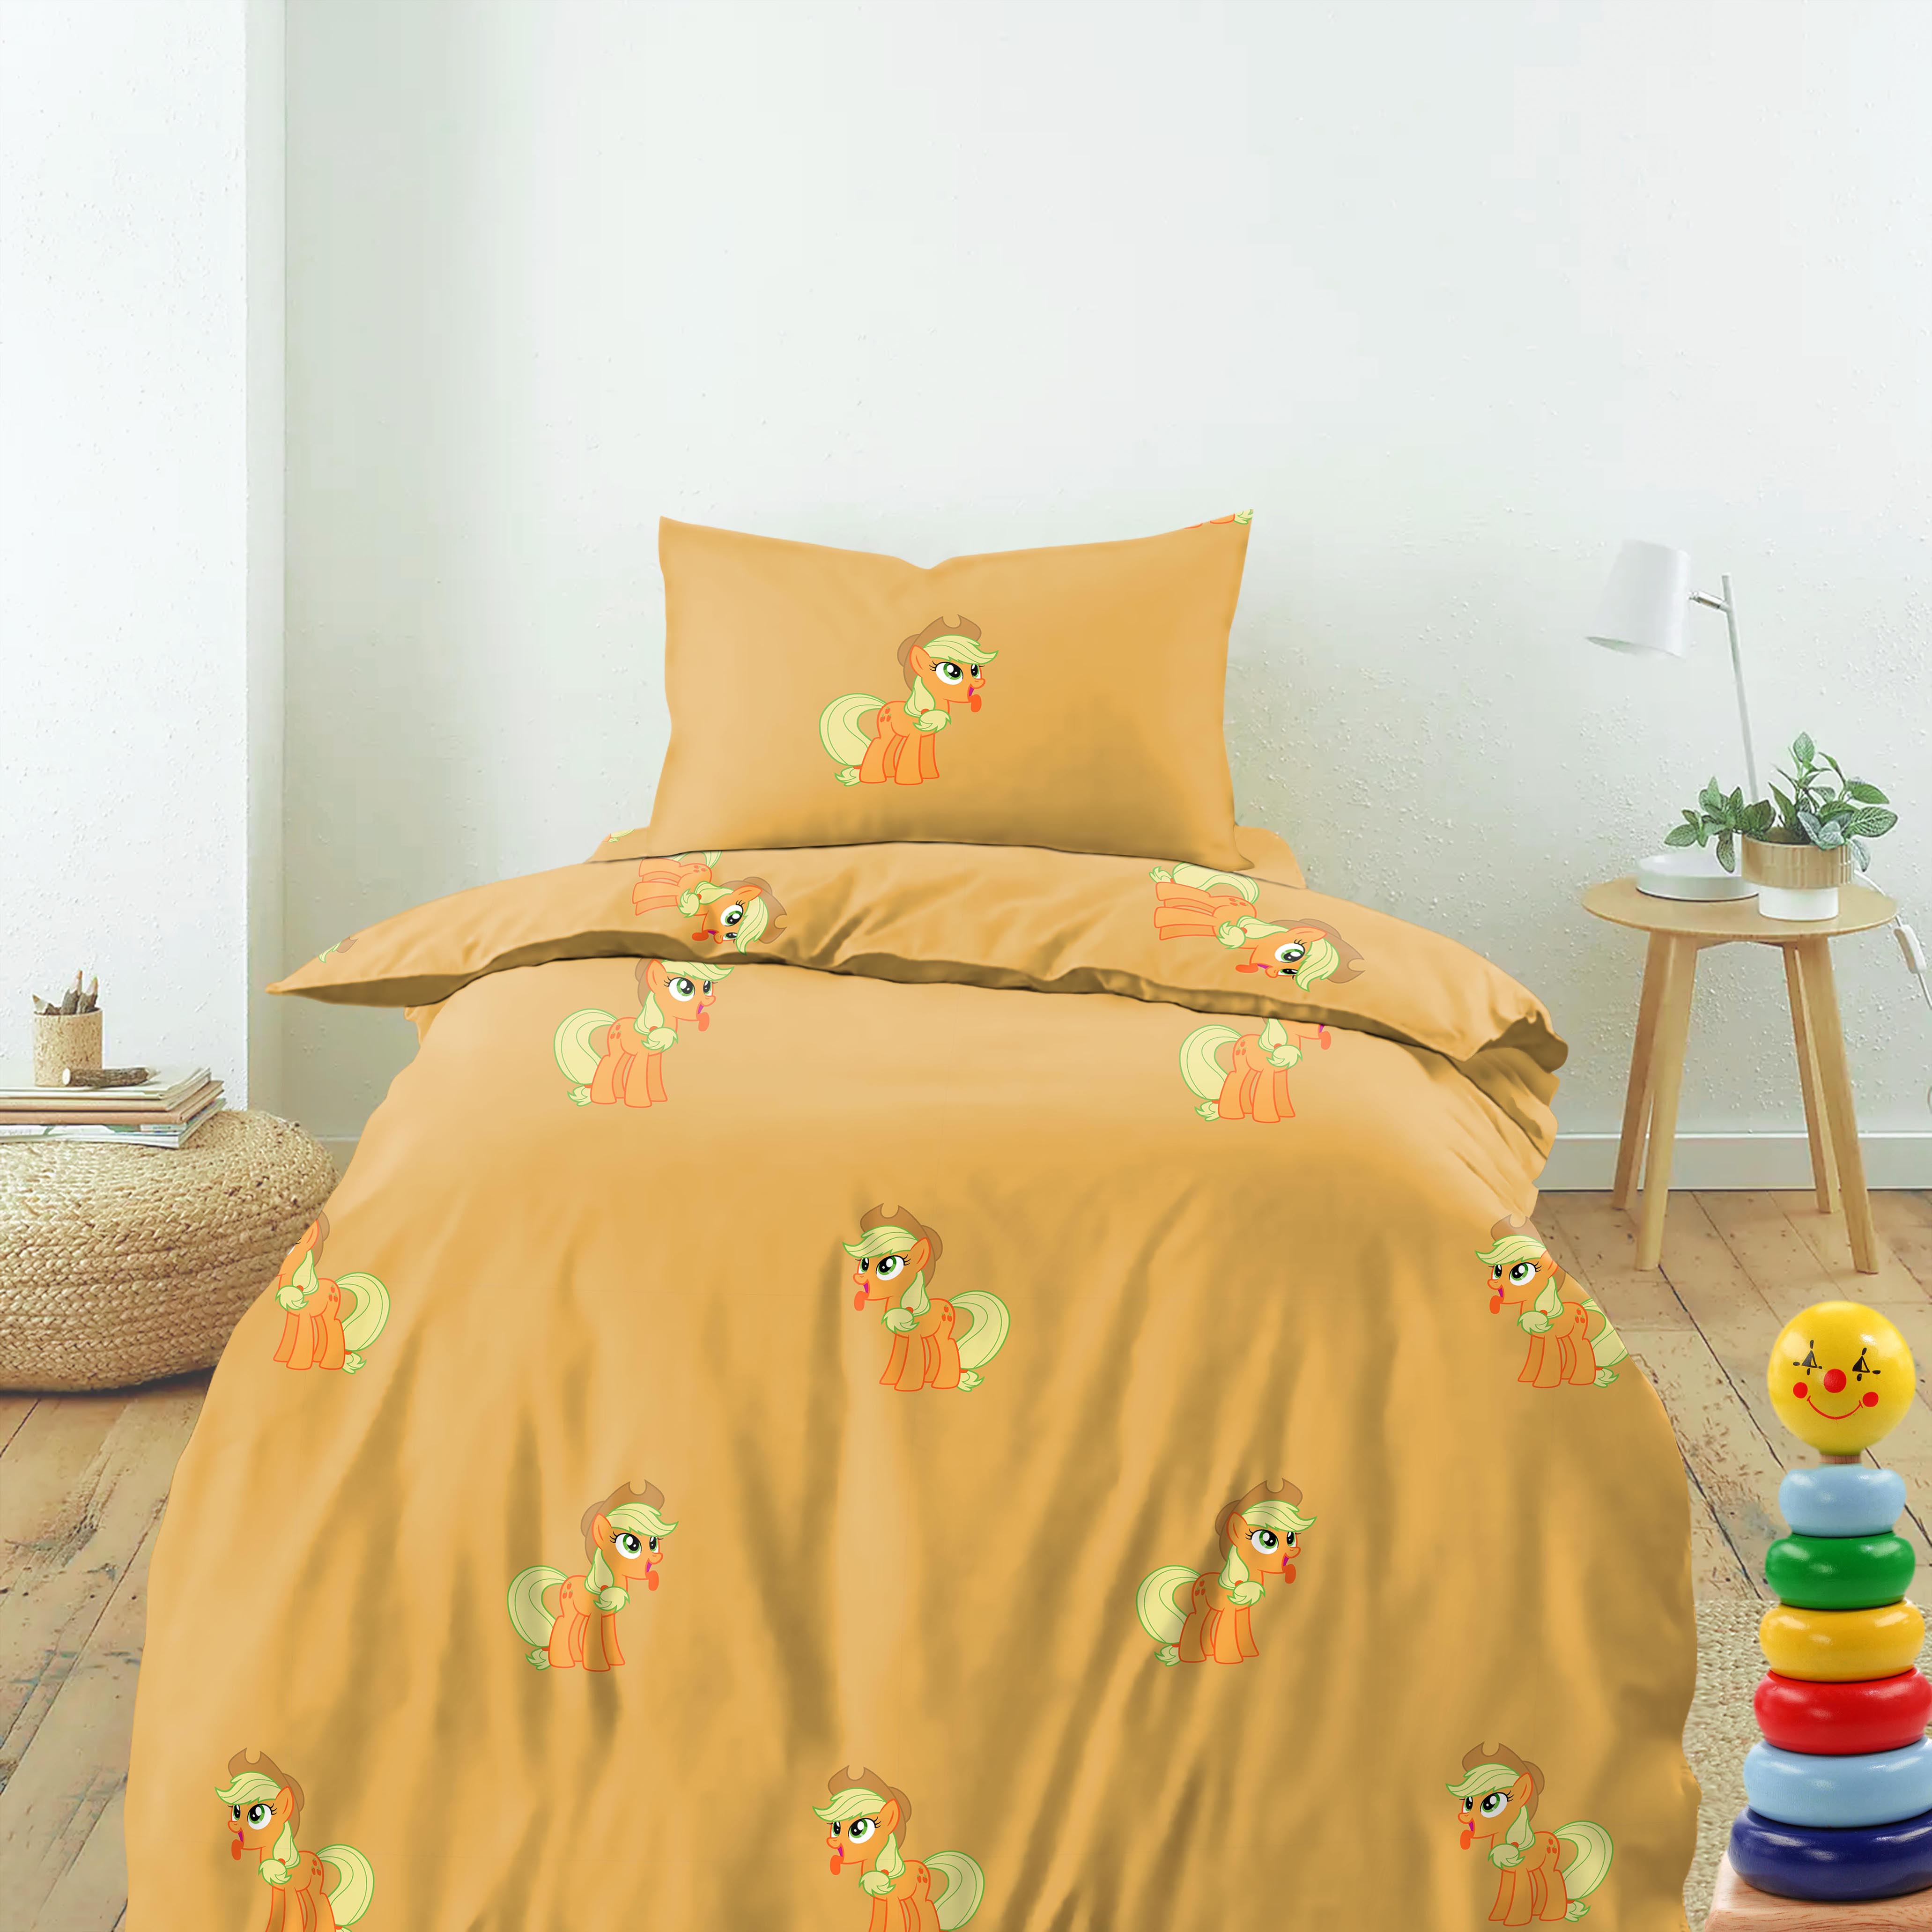 Bedcover Applejack Light Orange for Single Bed with Pillow Covers  King Size (60" X 90")